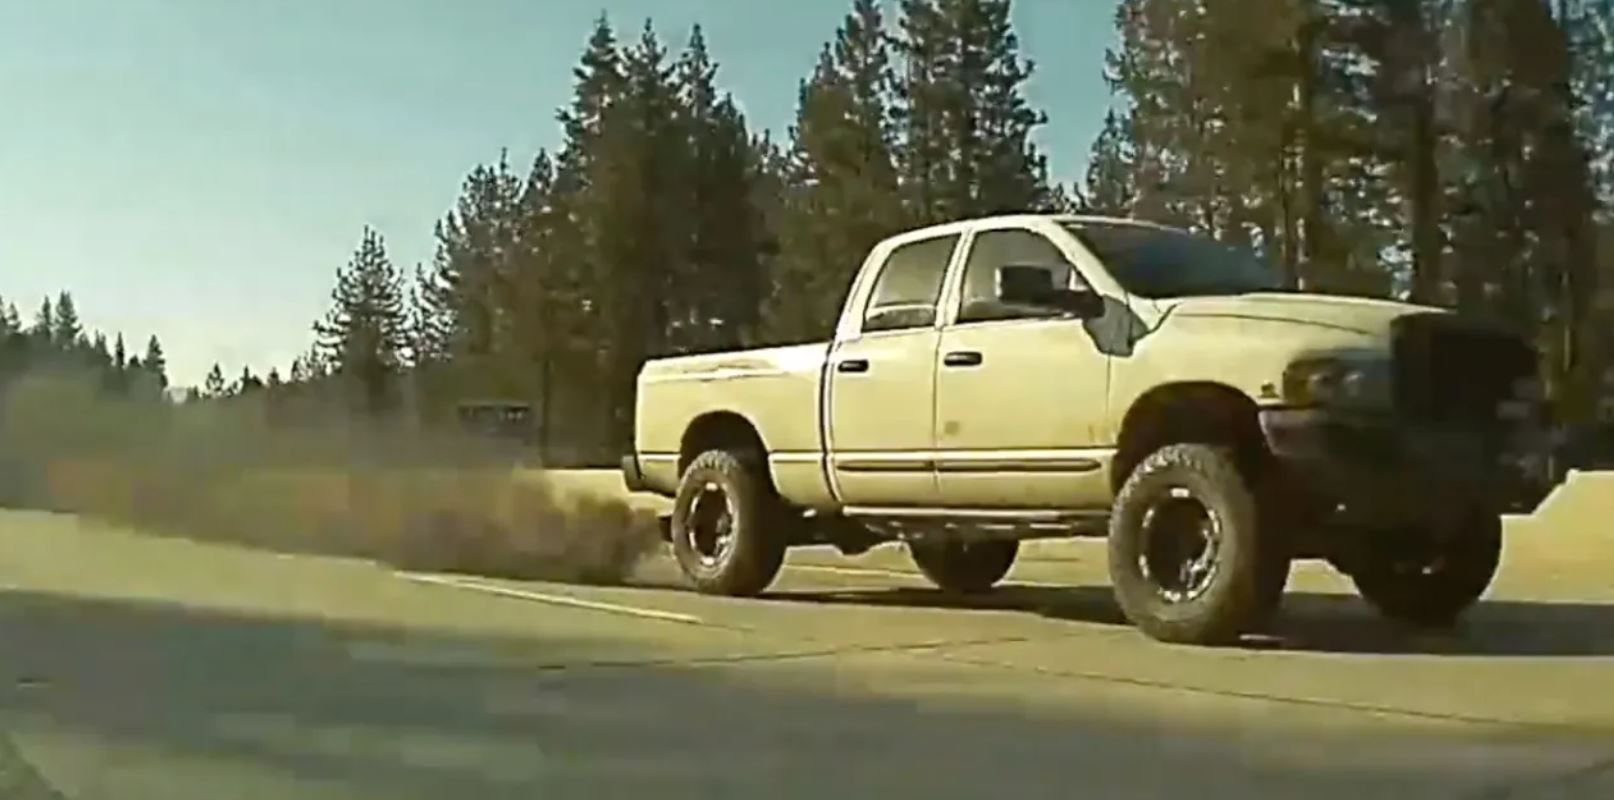 Pickup Truck With A Very Smoky Exhaust